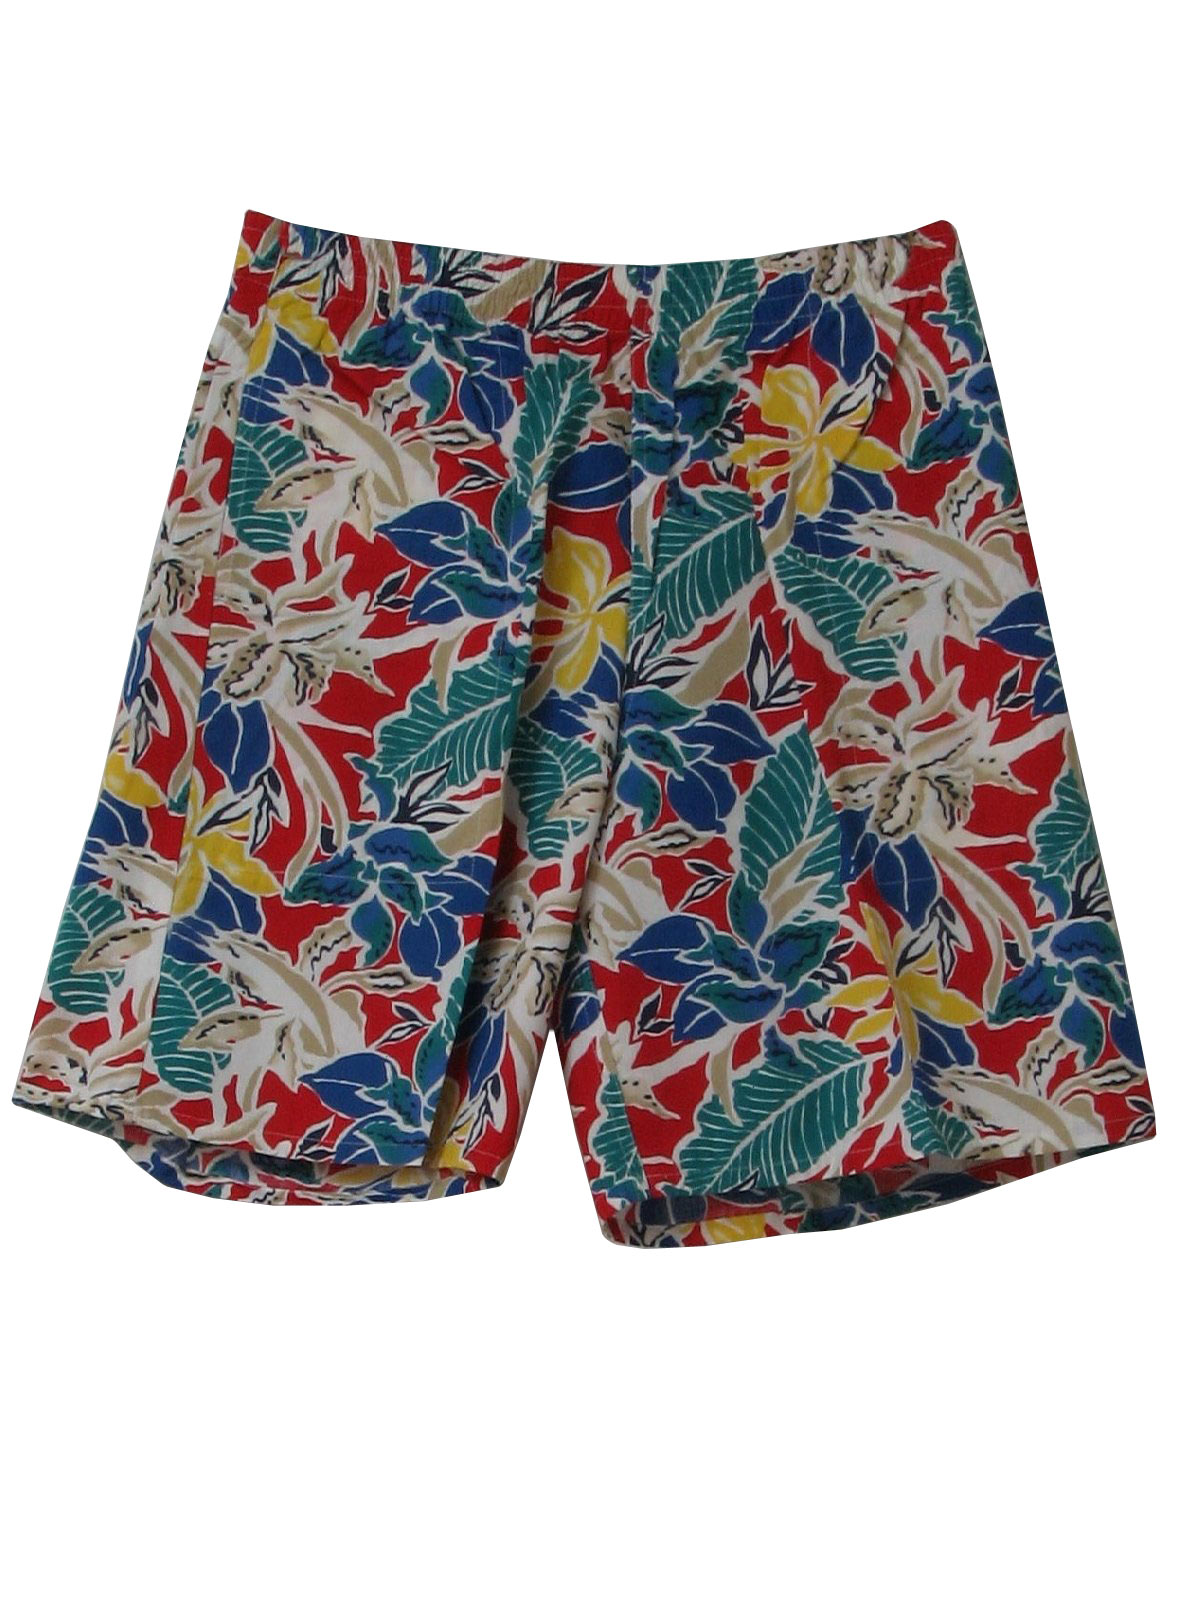 Woolrich 80's Vintage Shorts: 80s -Woolrich- Mens New-Old white, red ...